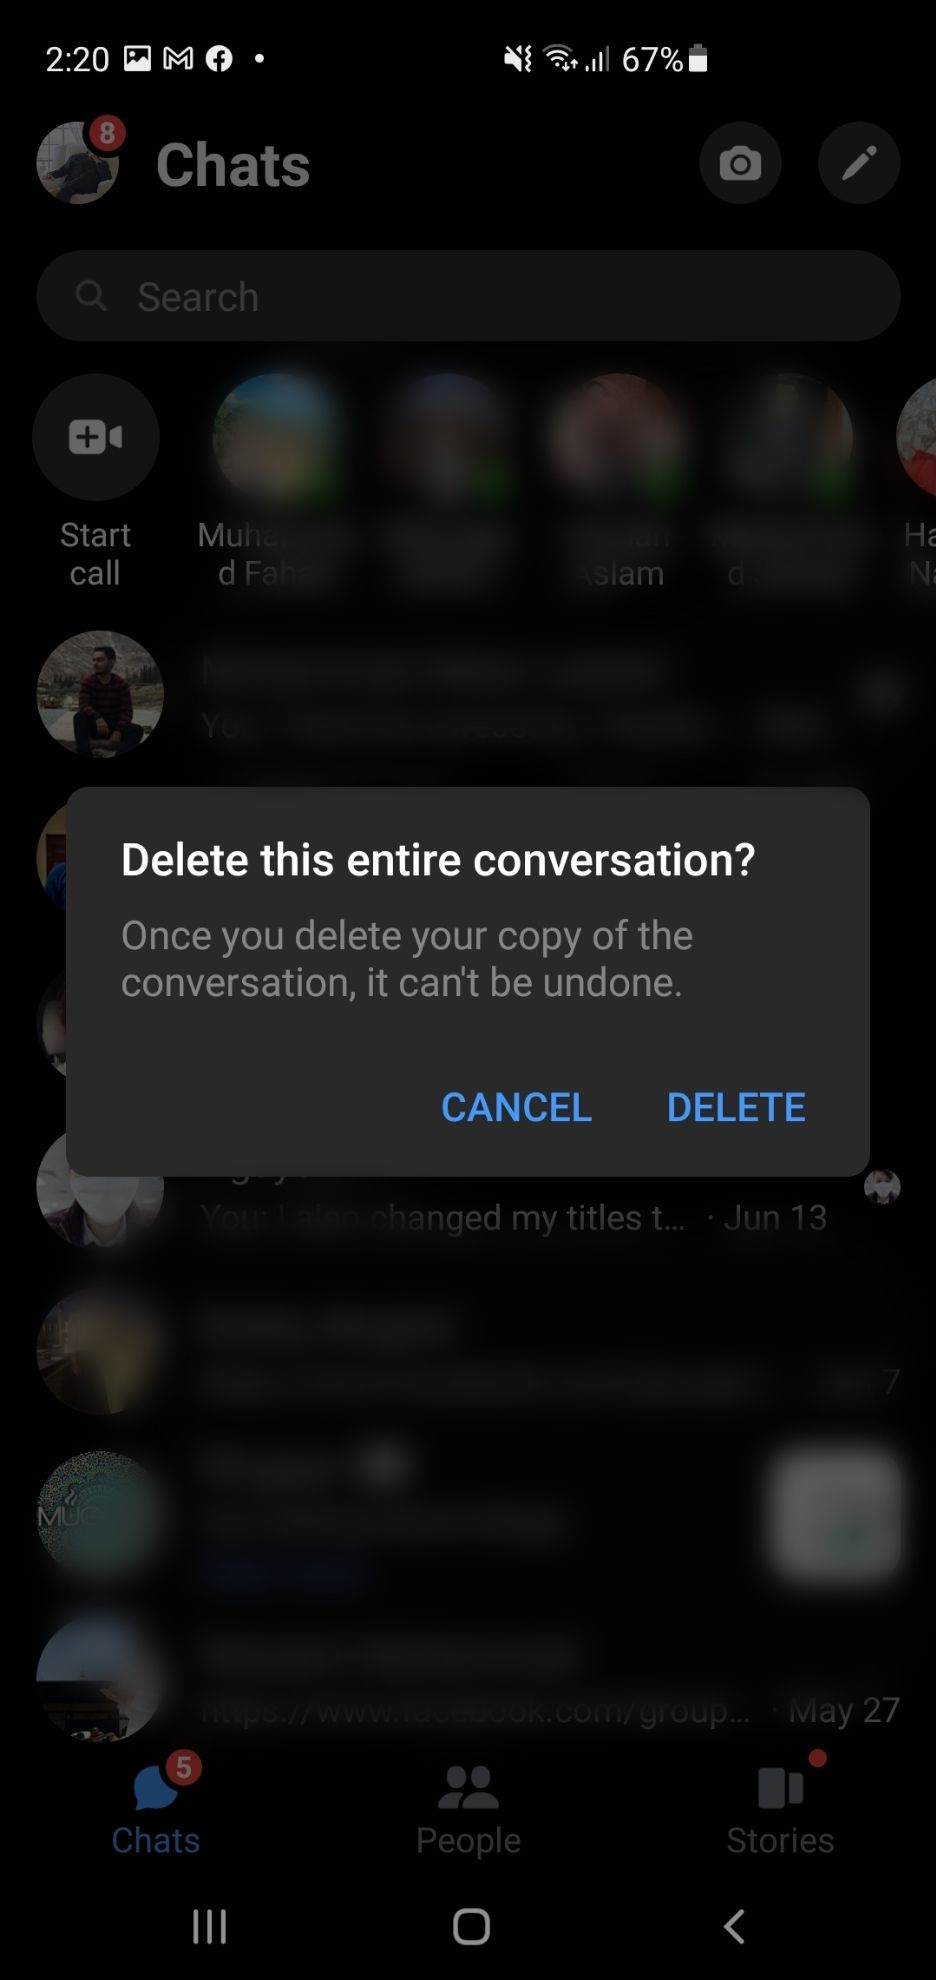 Tap to delete all conversation